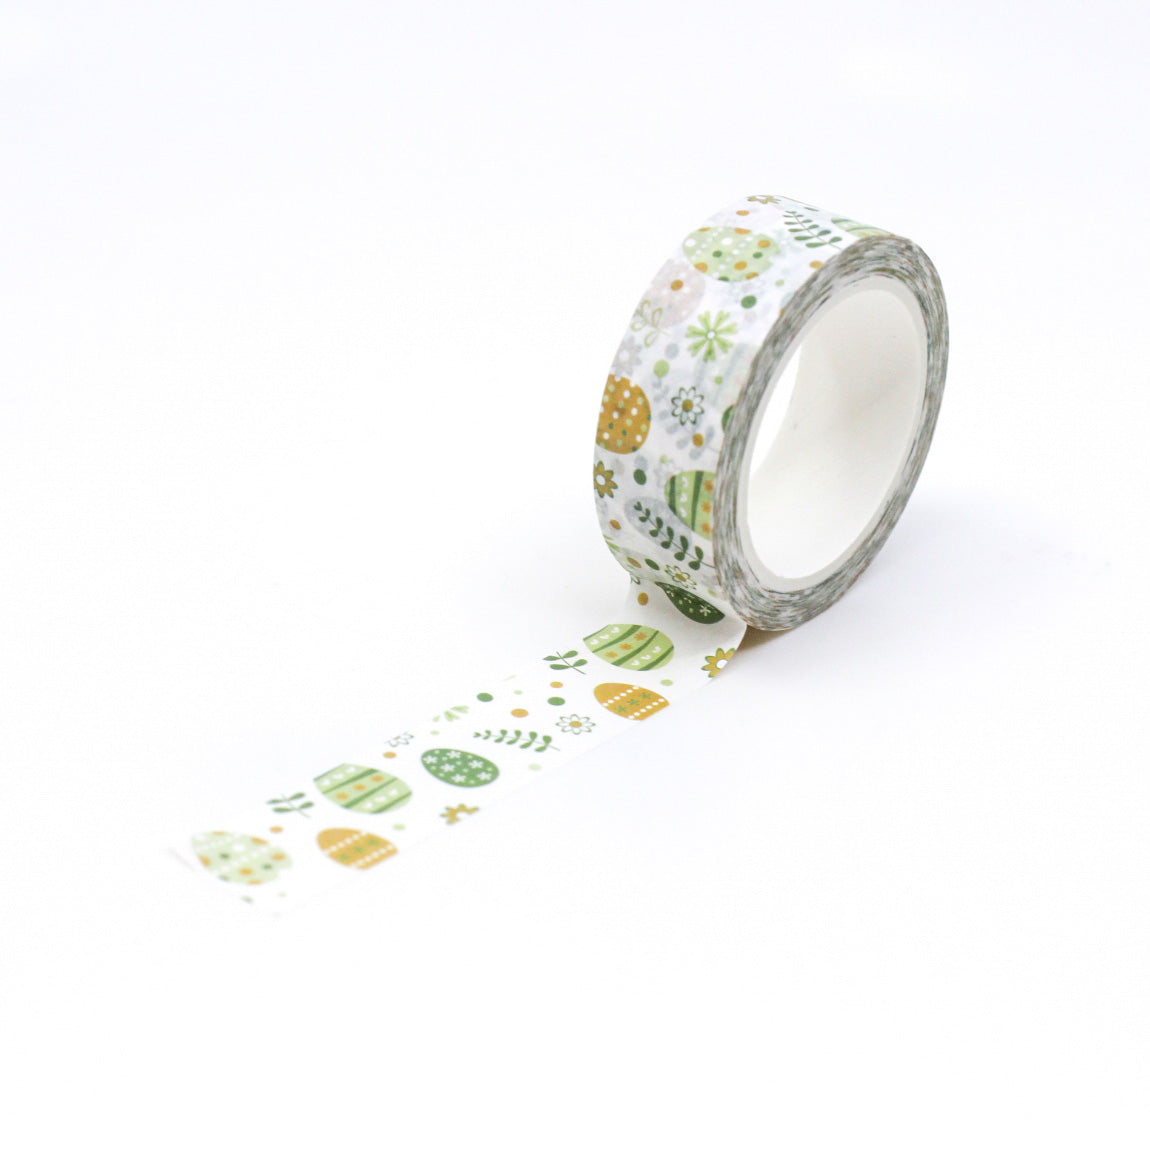 This delightful washi tape features a charming pattern of green and yellow Easter eggs, perfect for adding a festive touch to your Easter crafts and decorations. This tape is sold at BBB Supplies Craft Shop.